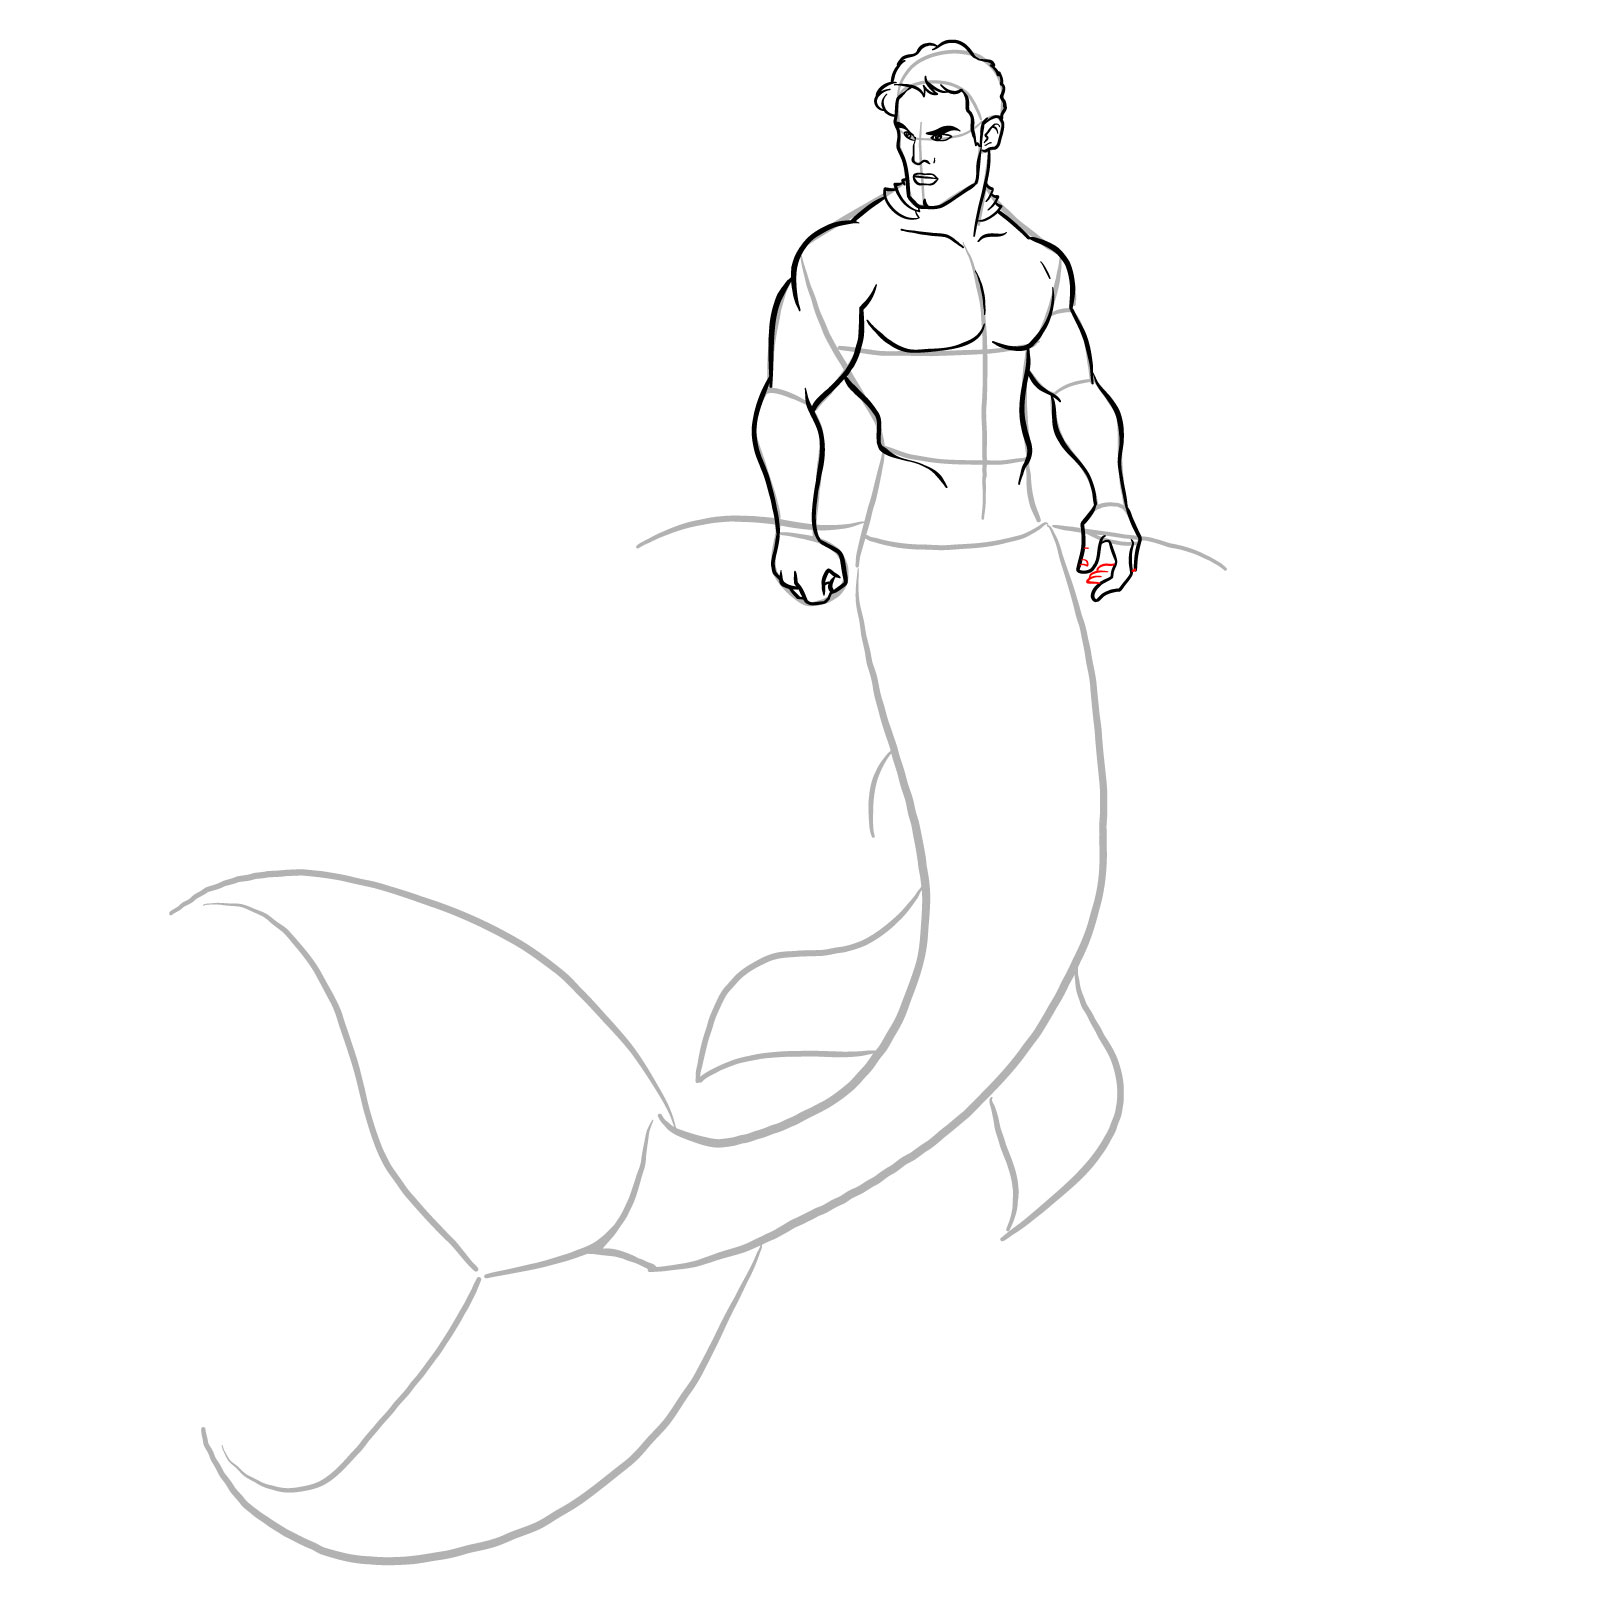 How to draw a Merman - step 22